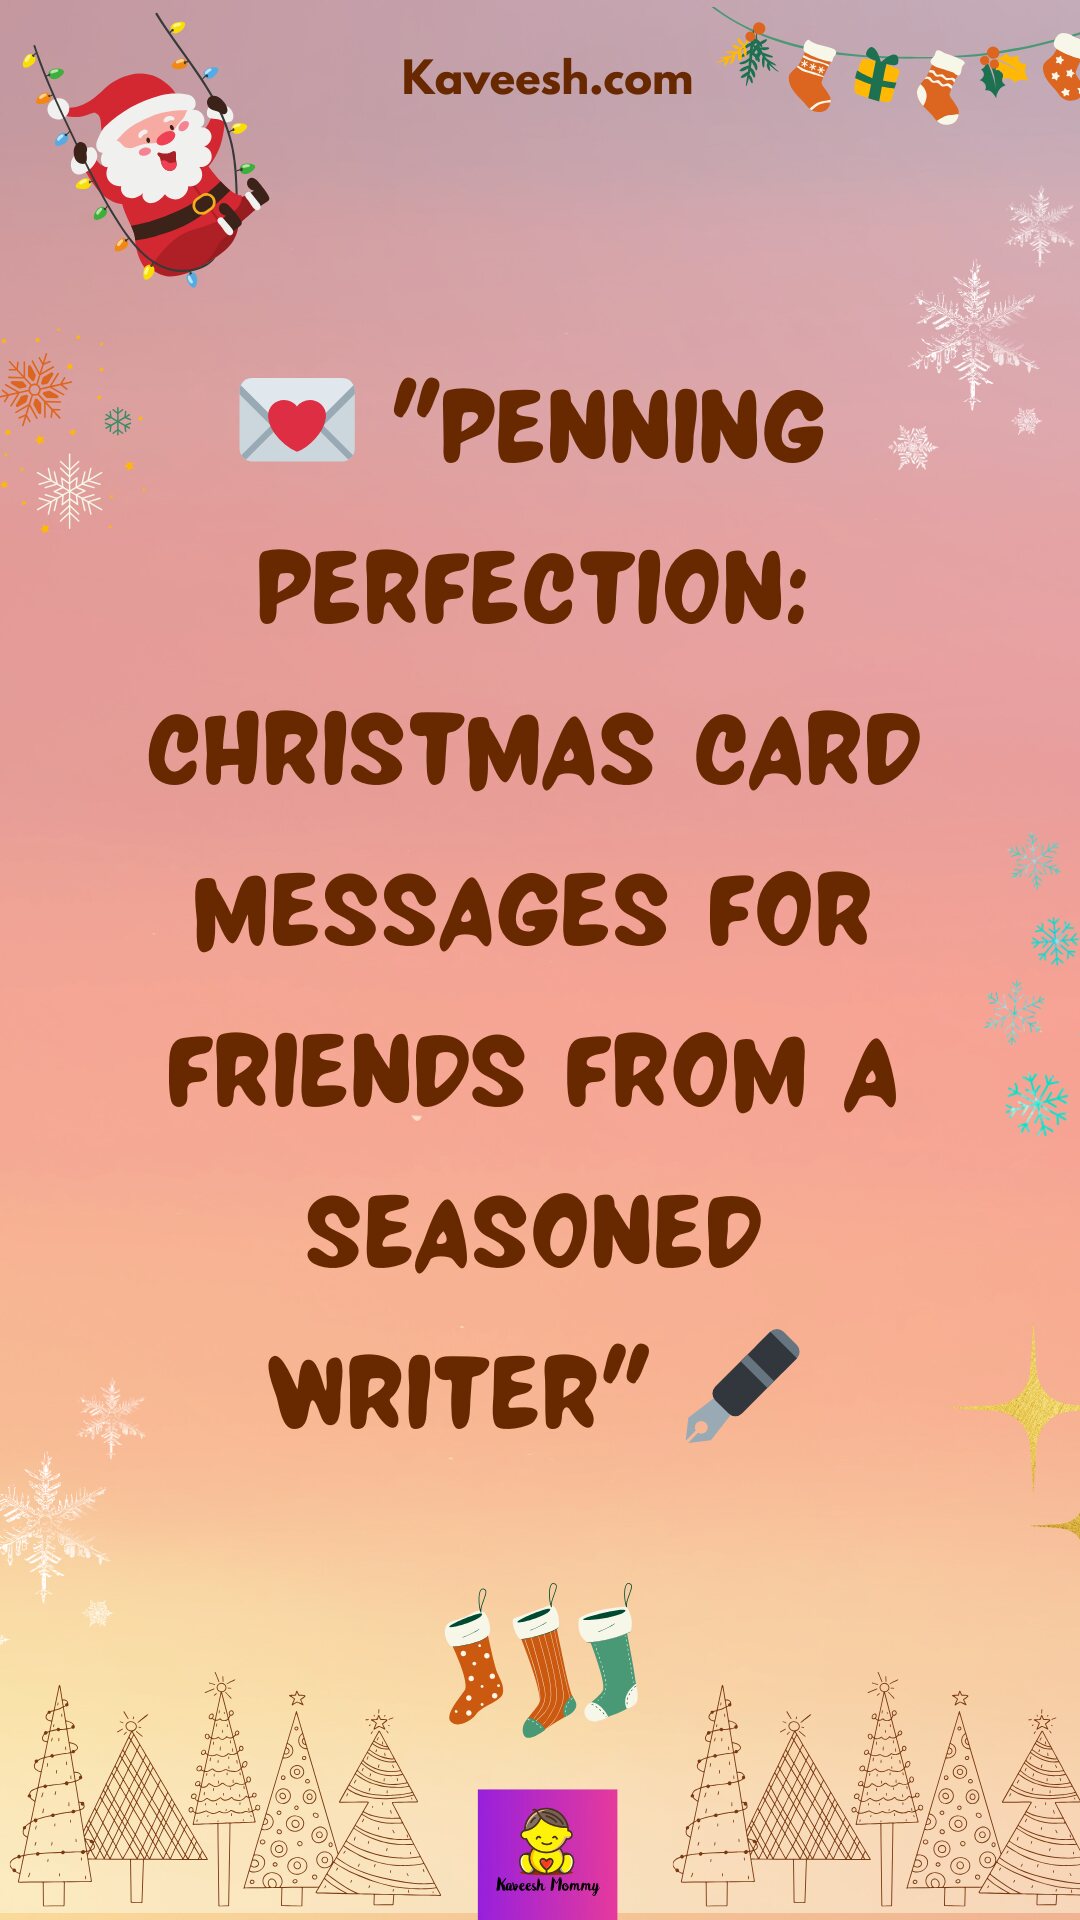 List of Merry Christmas Card Wishes for Friends